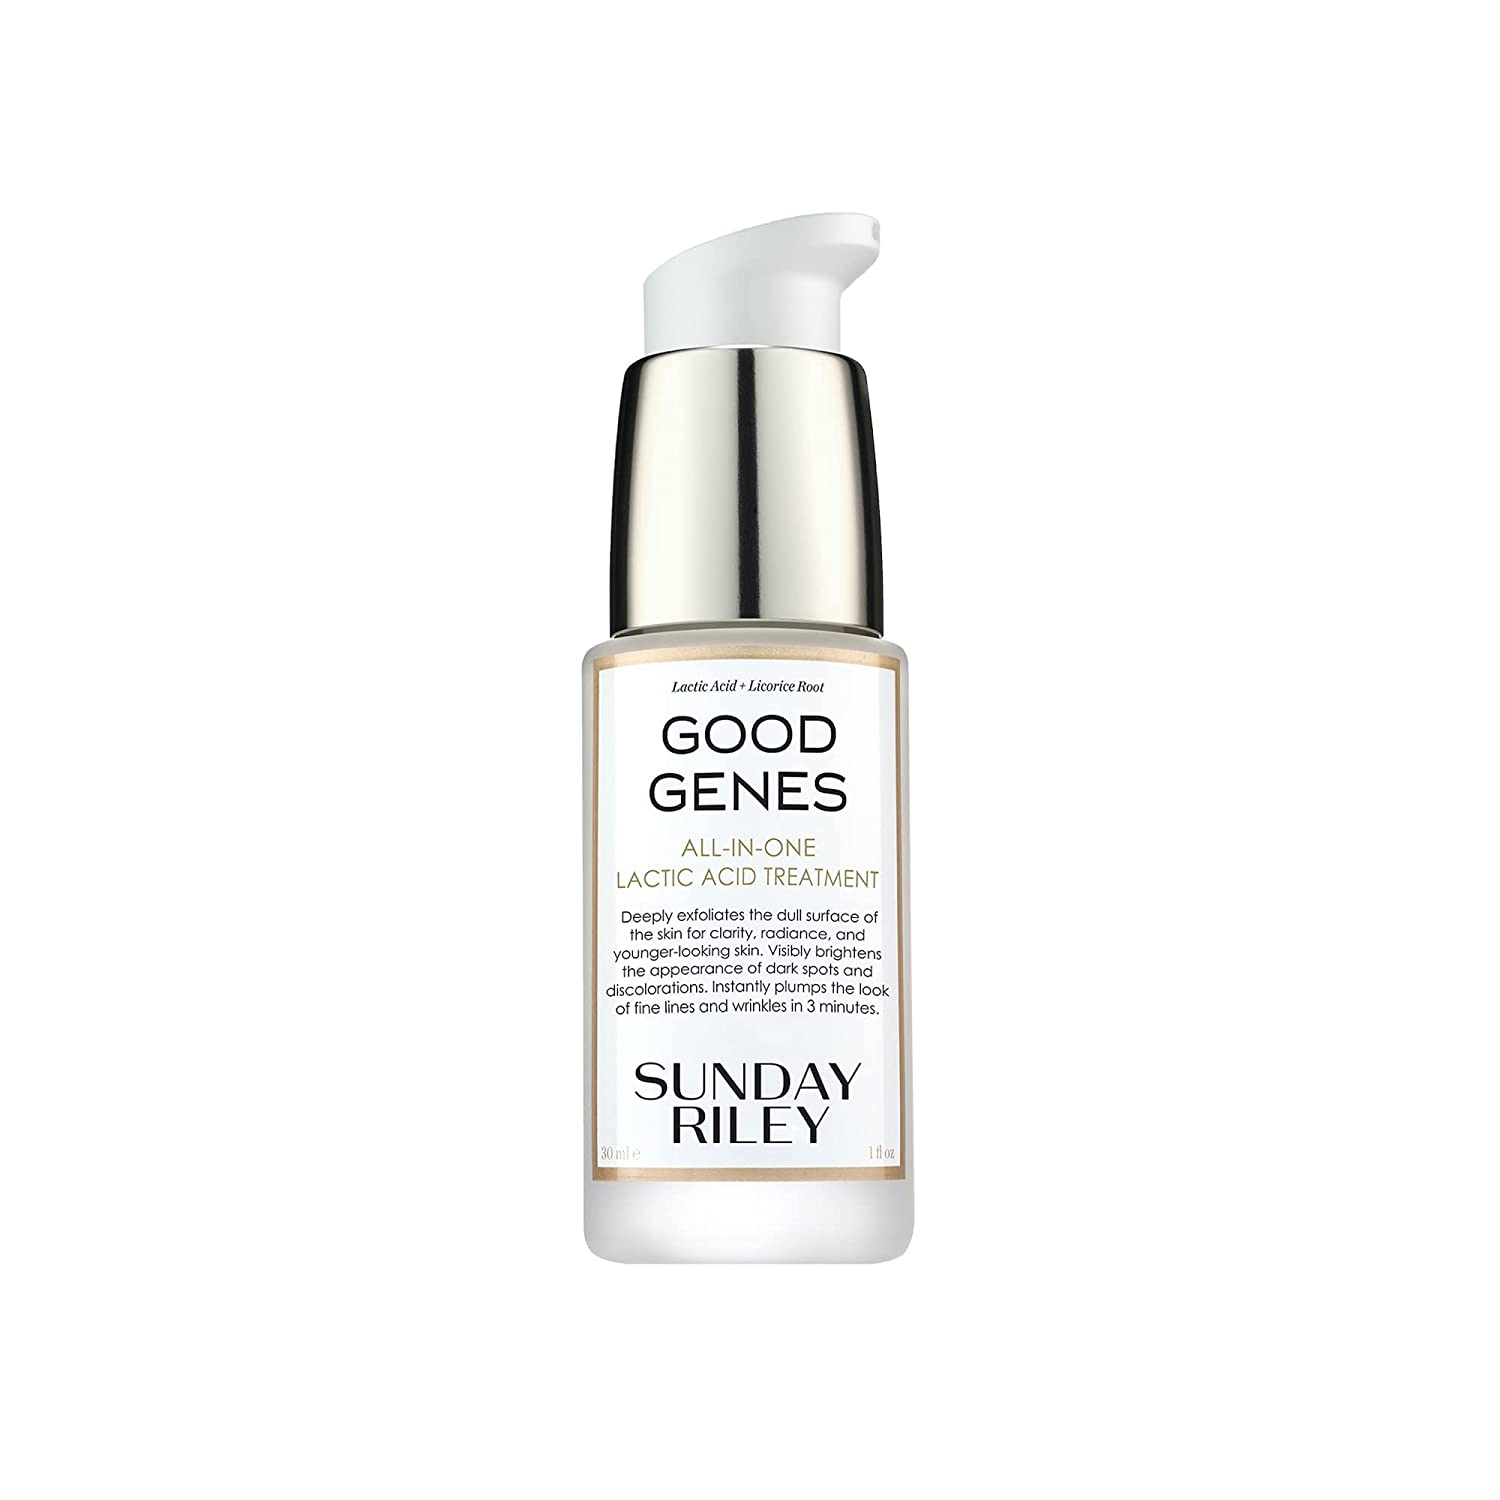 1-Oz Sunday Riley Good Genes All-In-One Lactic Acid Facial Treatment $59.50 & More + Free Shipping